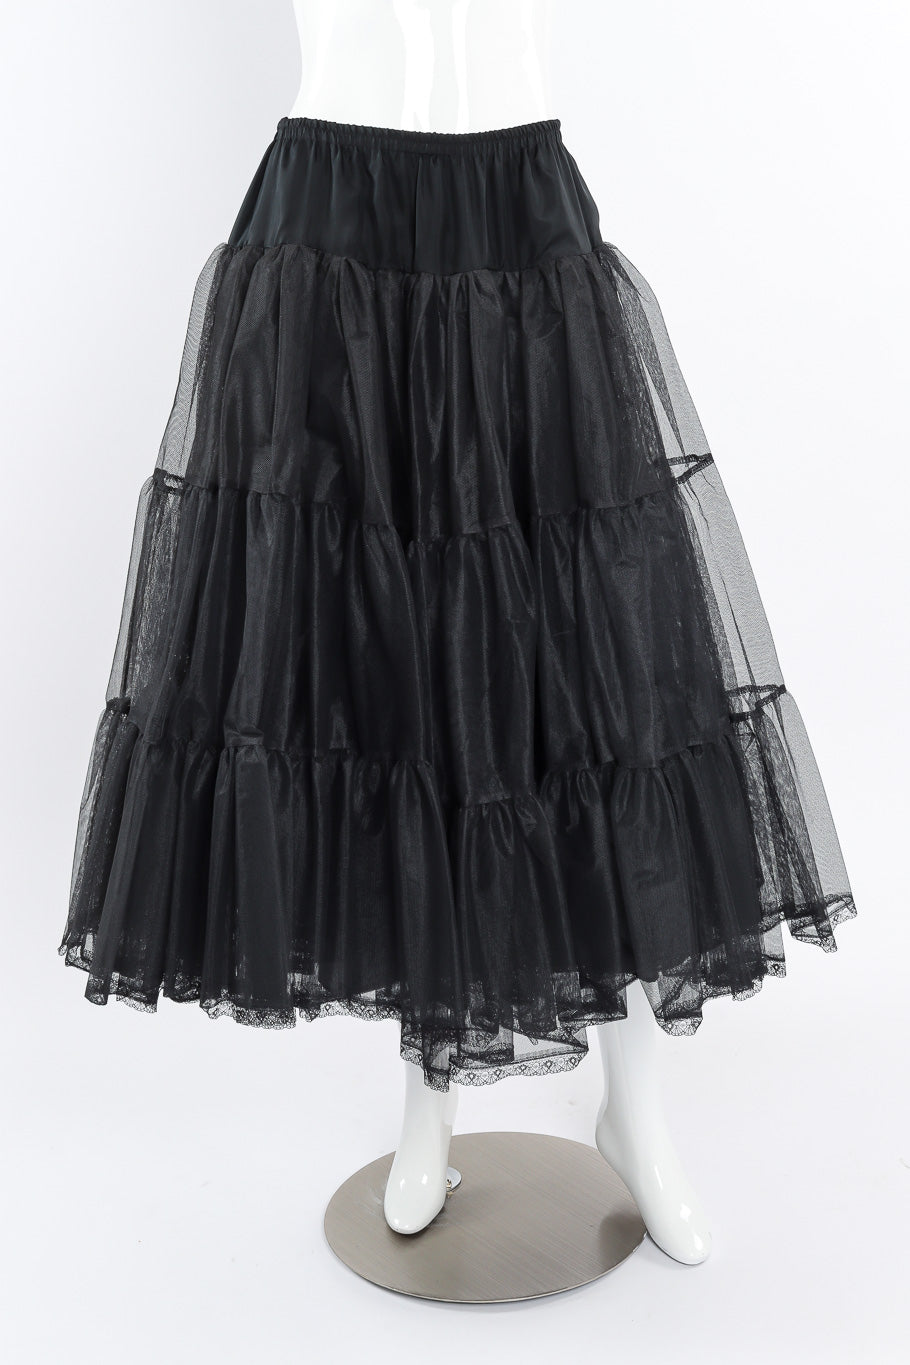 Petticoat skirt by Morgane Le Fay on mannequin front @recessla